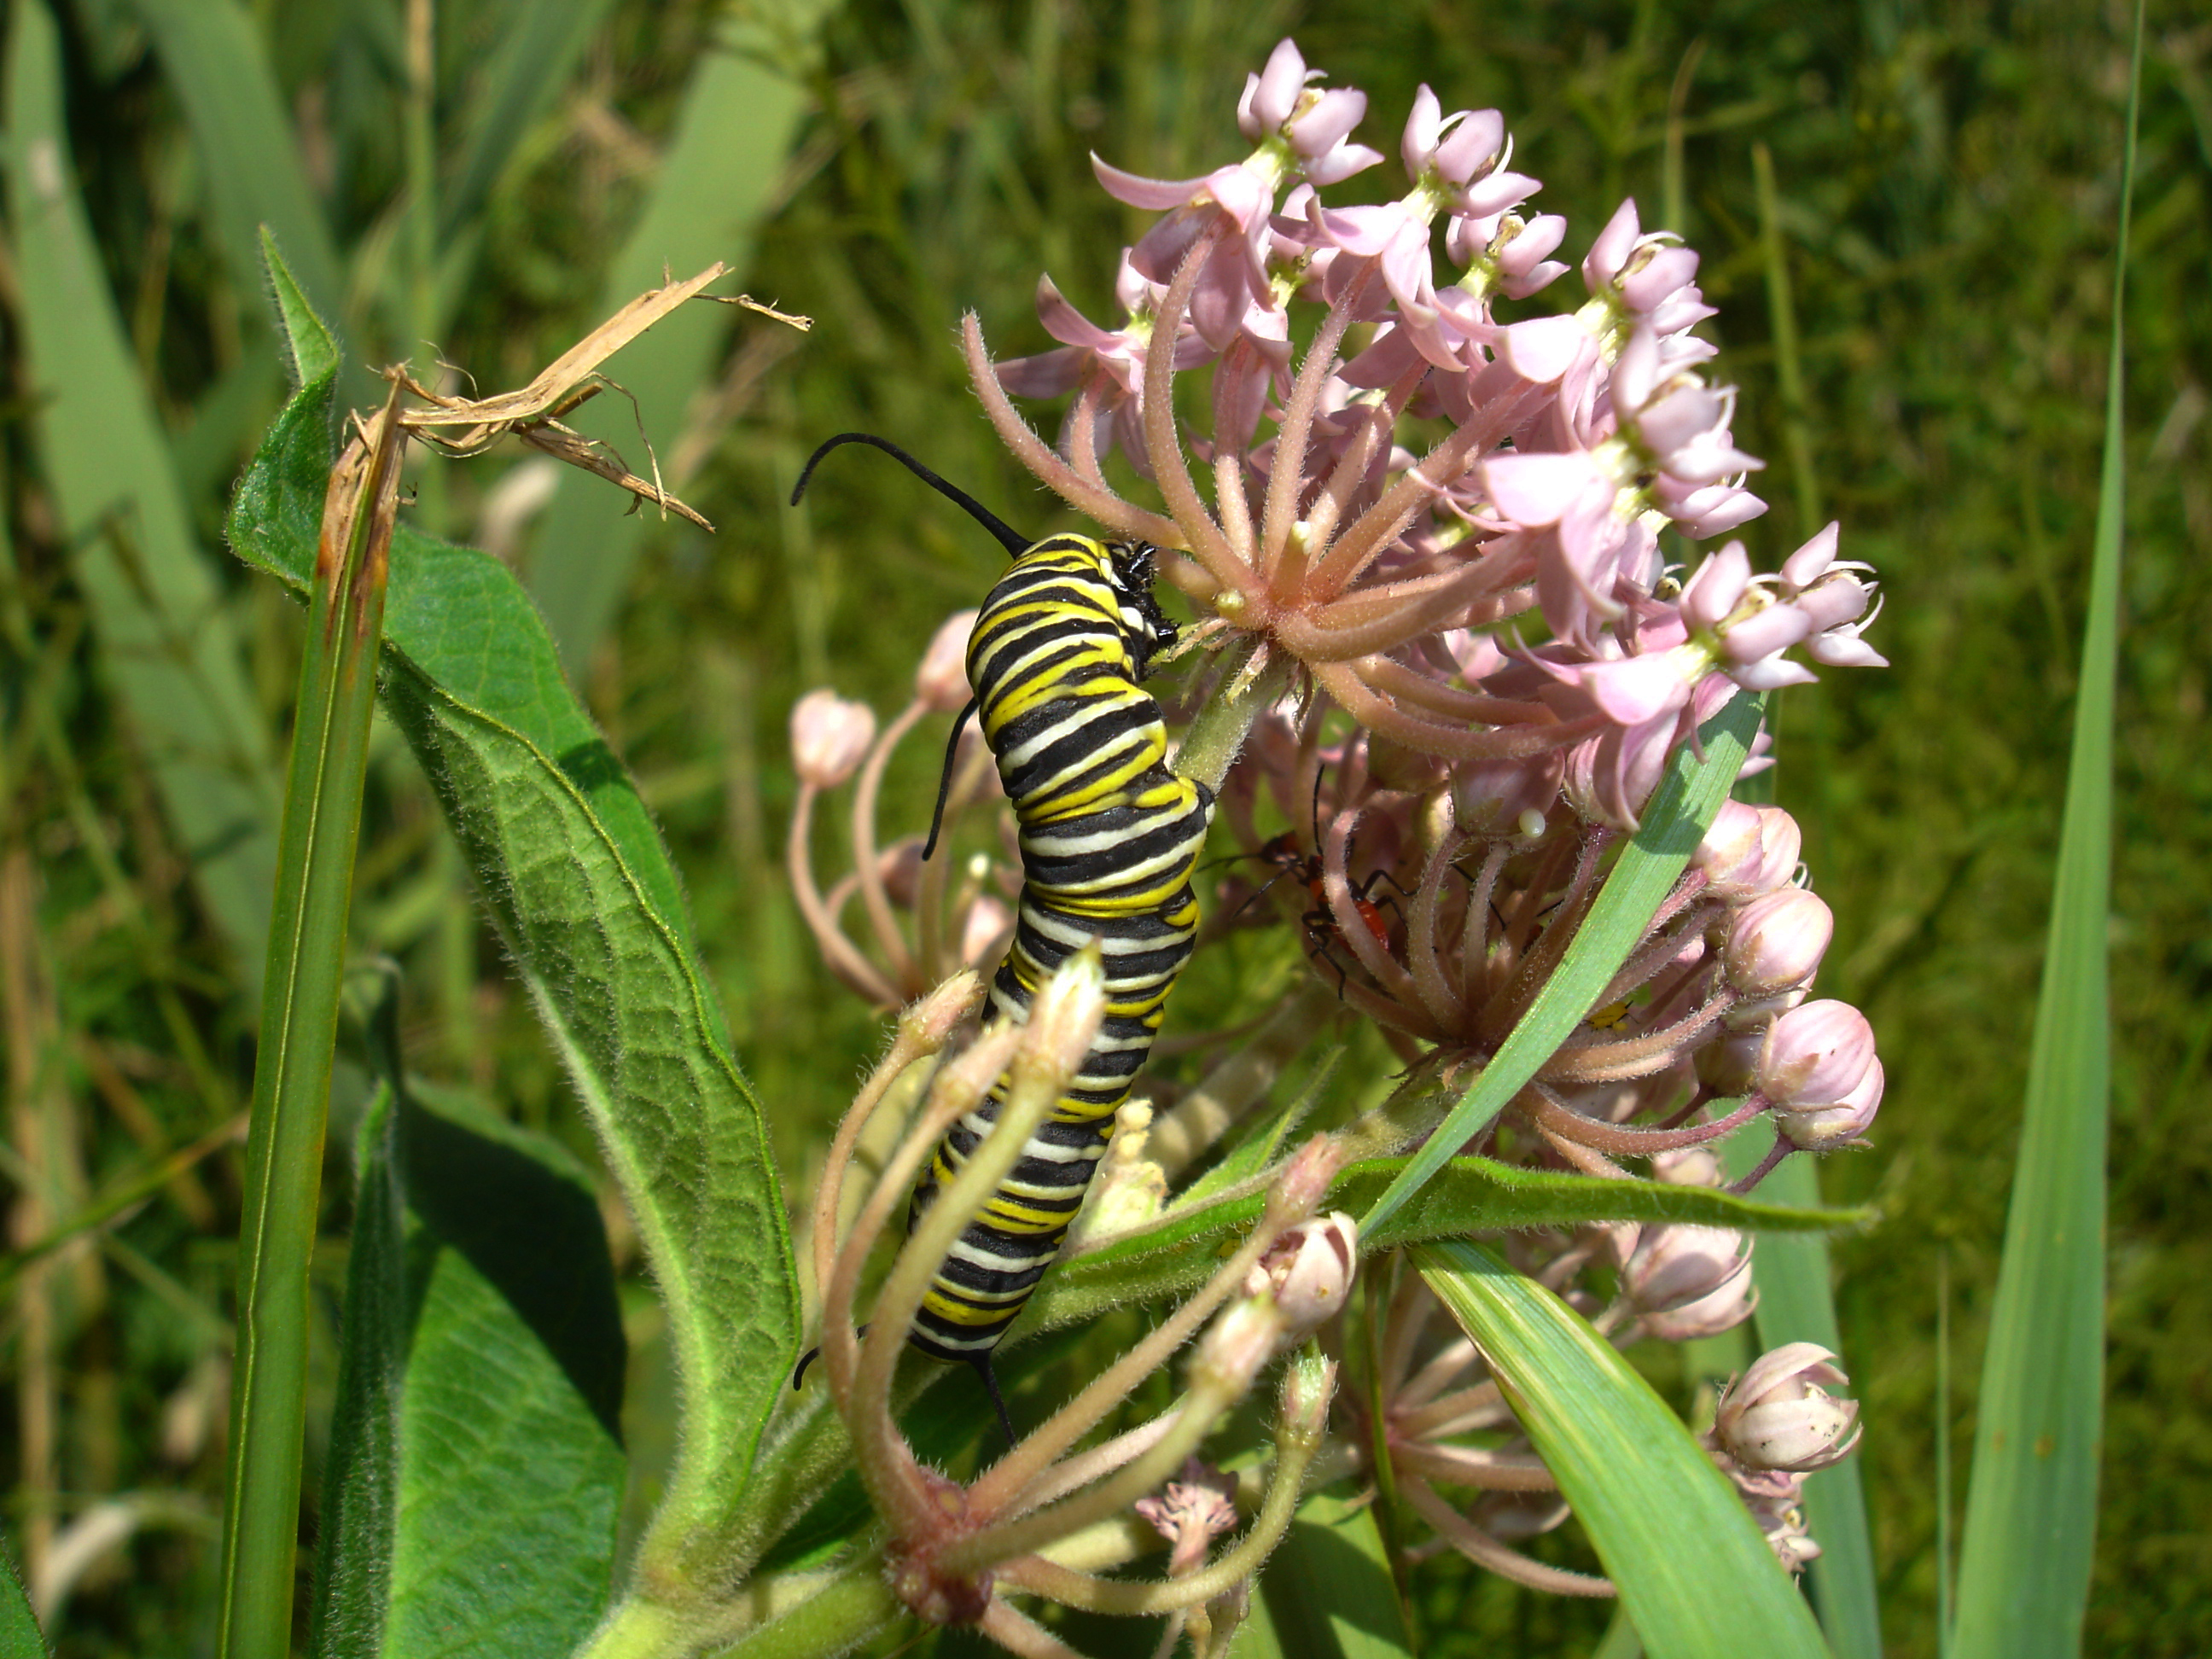 Image of Monarch butterfly caterpillar feeding on a common milkweed plant